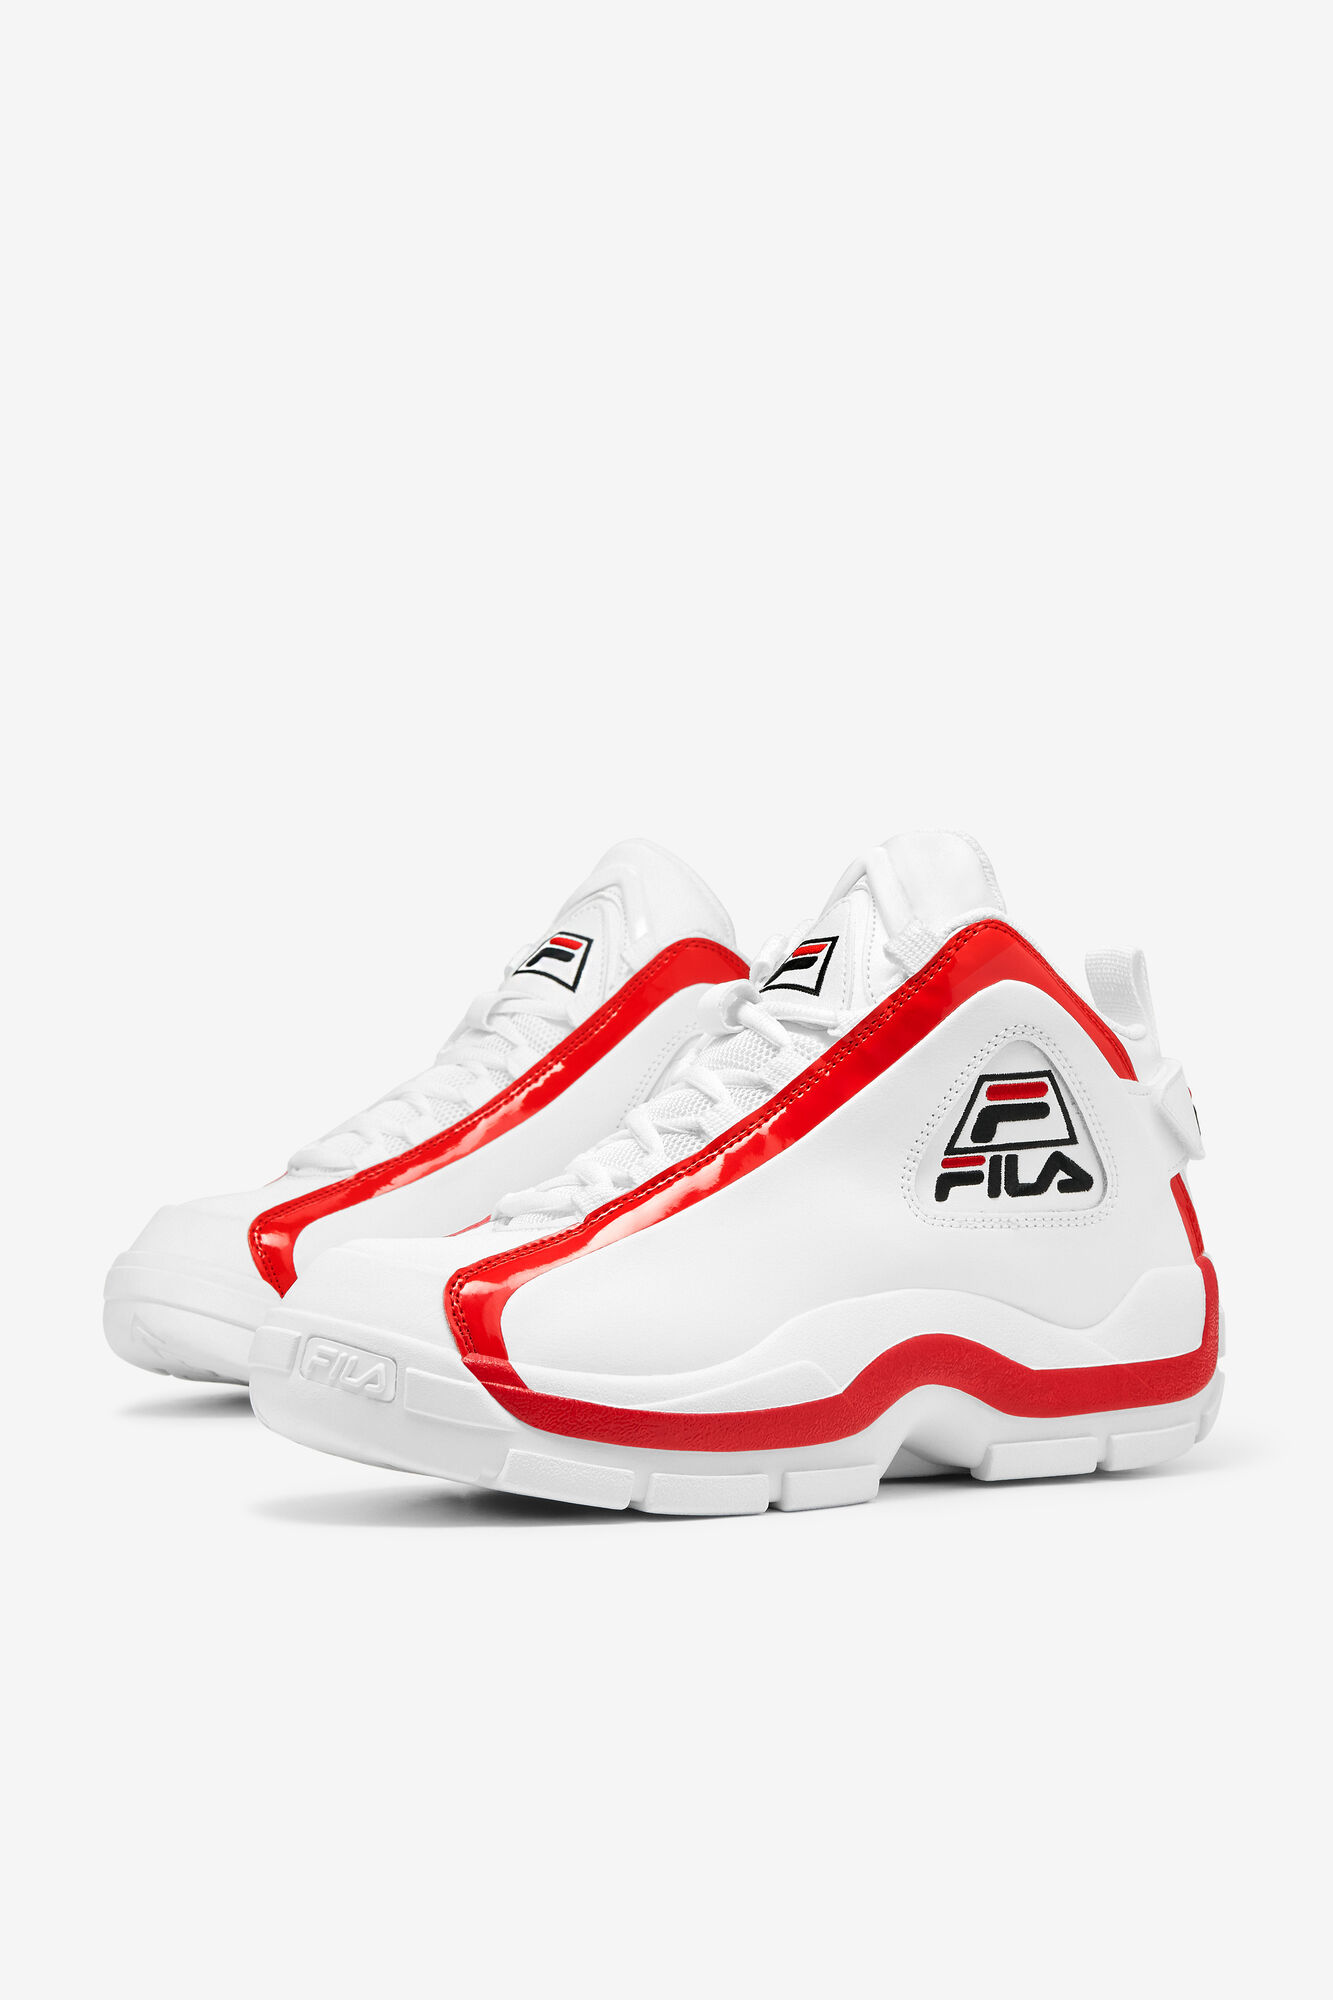 Grant Hill 2 Shoes White + Red Colorway | Fila